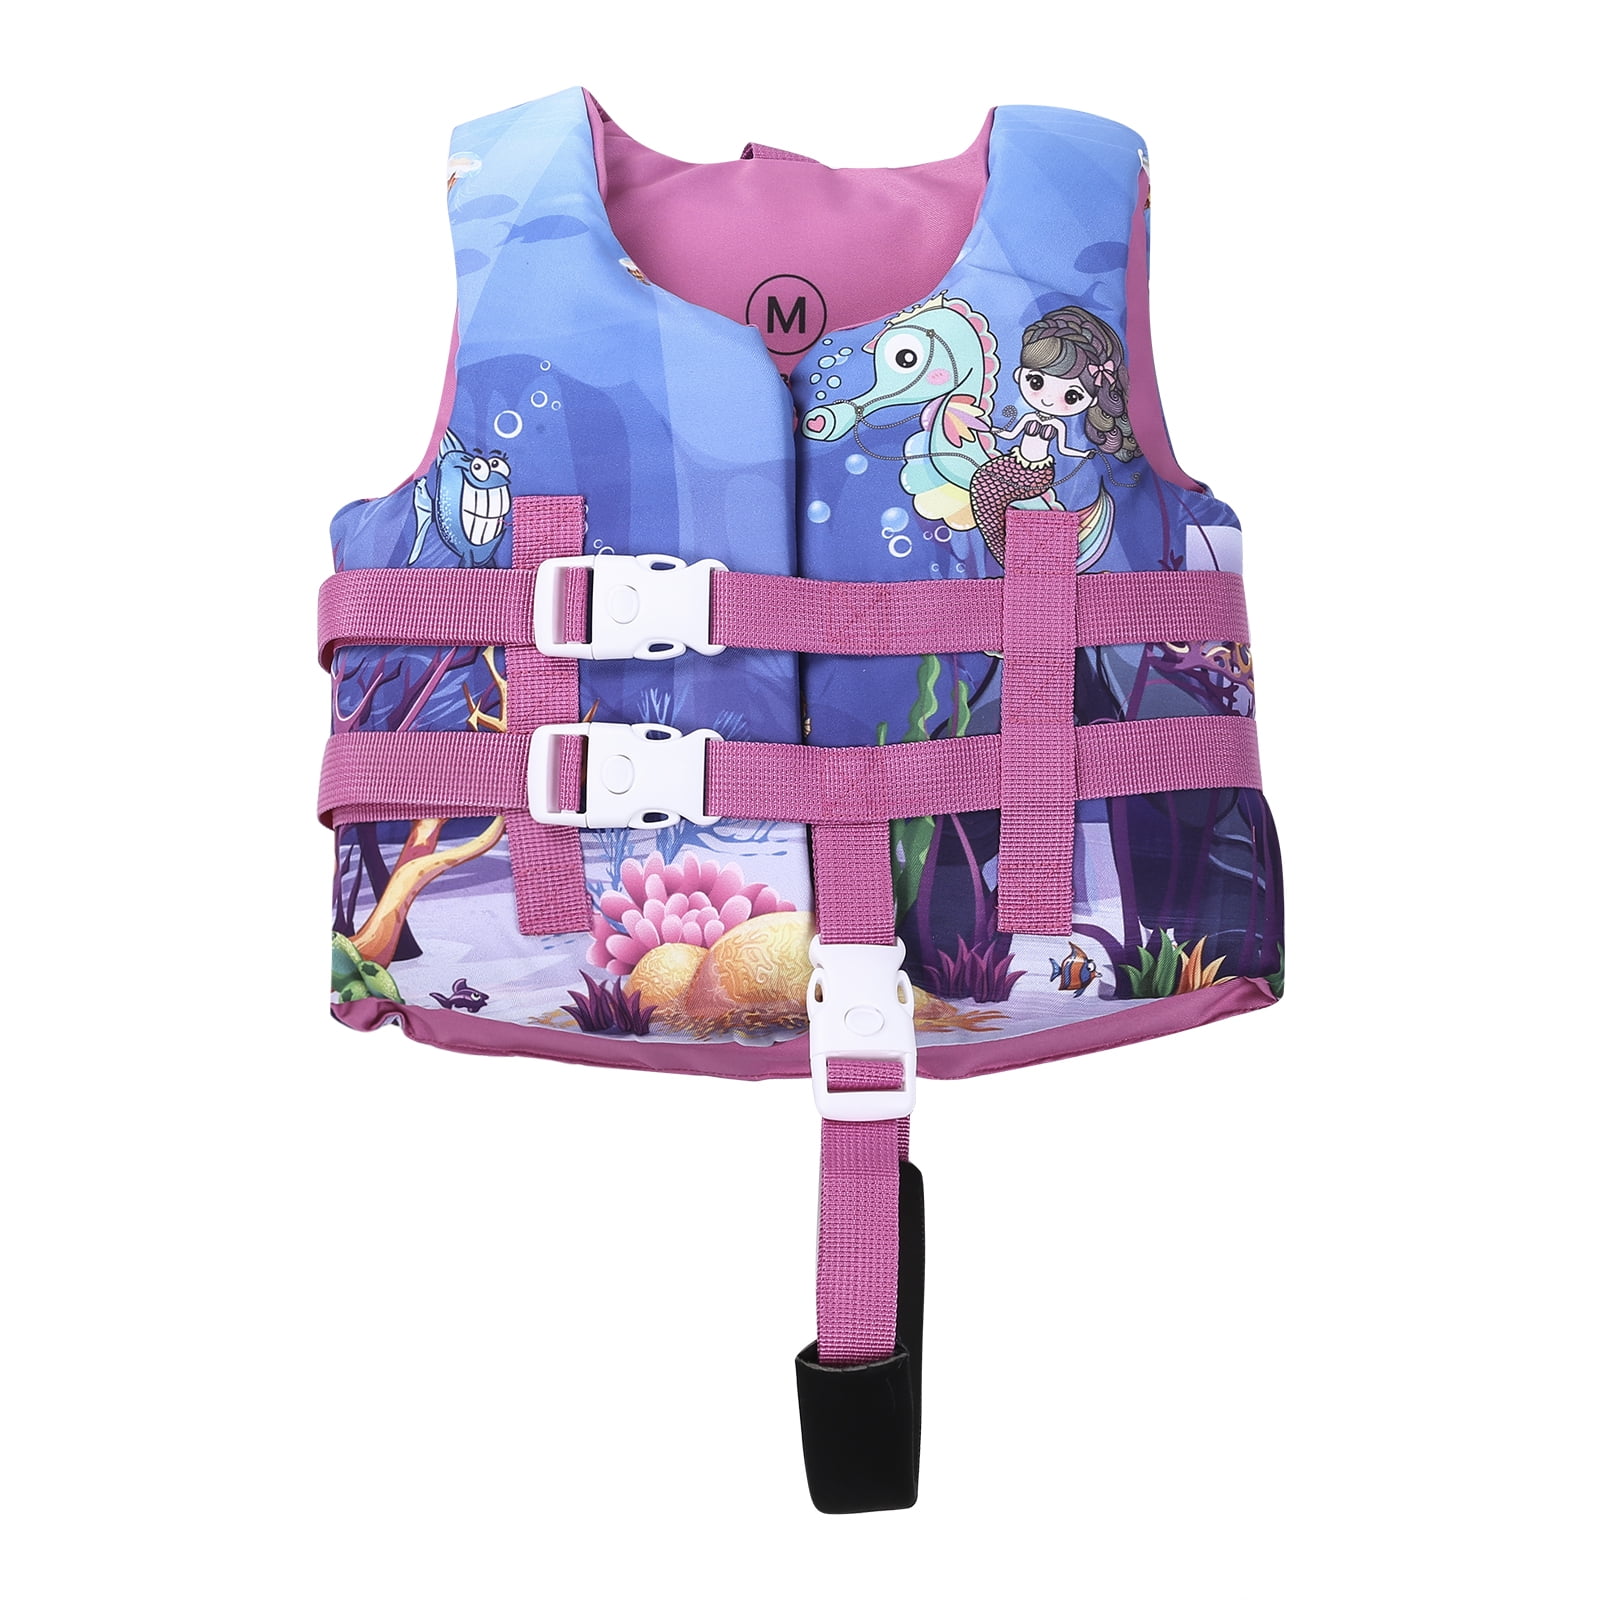 Swimming Cartoon Life Jacket safety Vest for Kids Baby Children Cute Pink US 